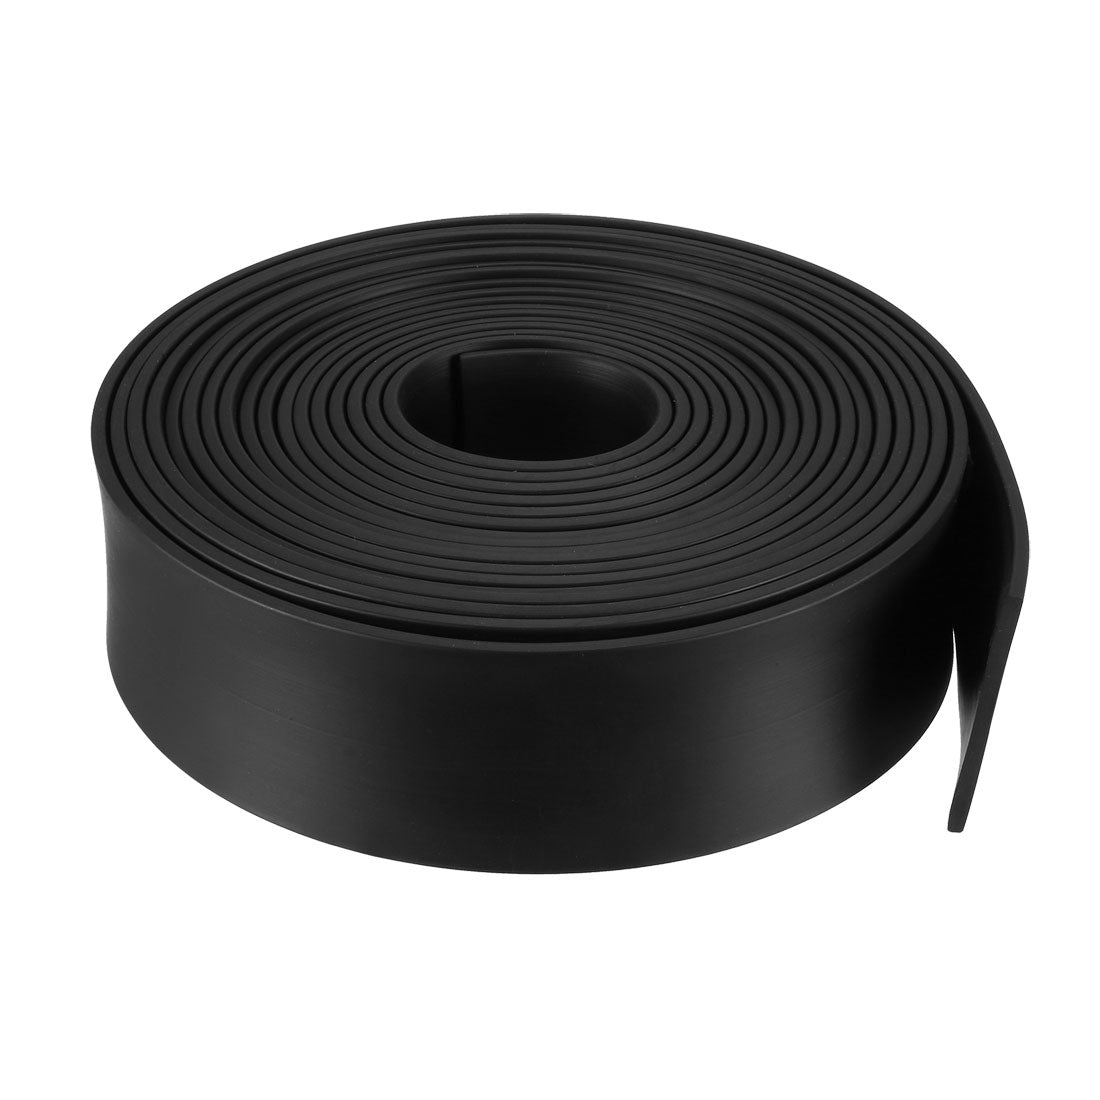 uxcell Uxcell Solid Rectangle Rubber Seal Strip 10mm Wide 5mm Thick, 1 Meter Long Black